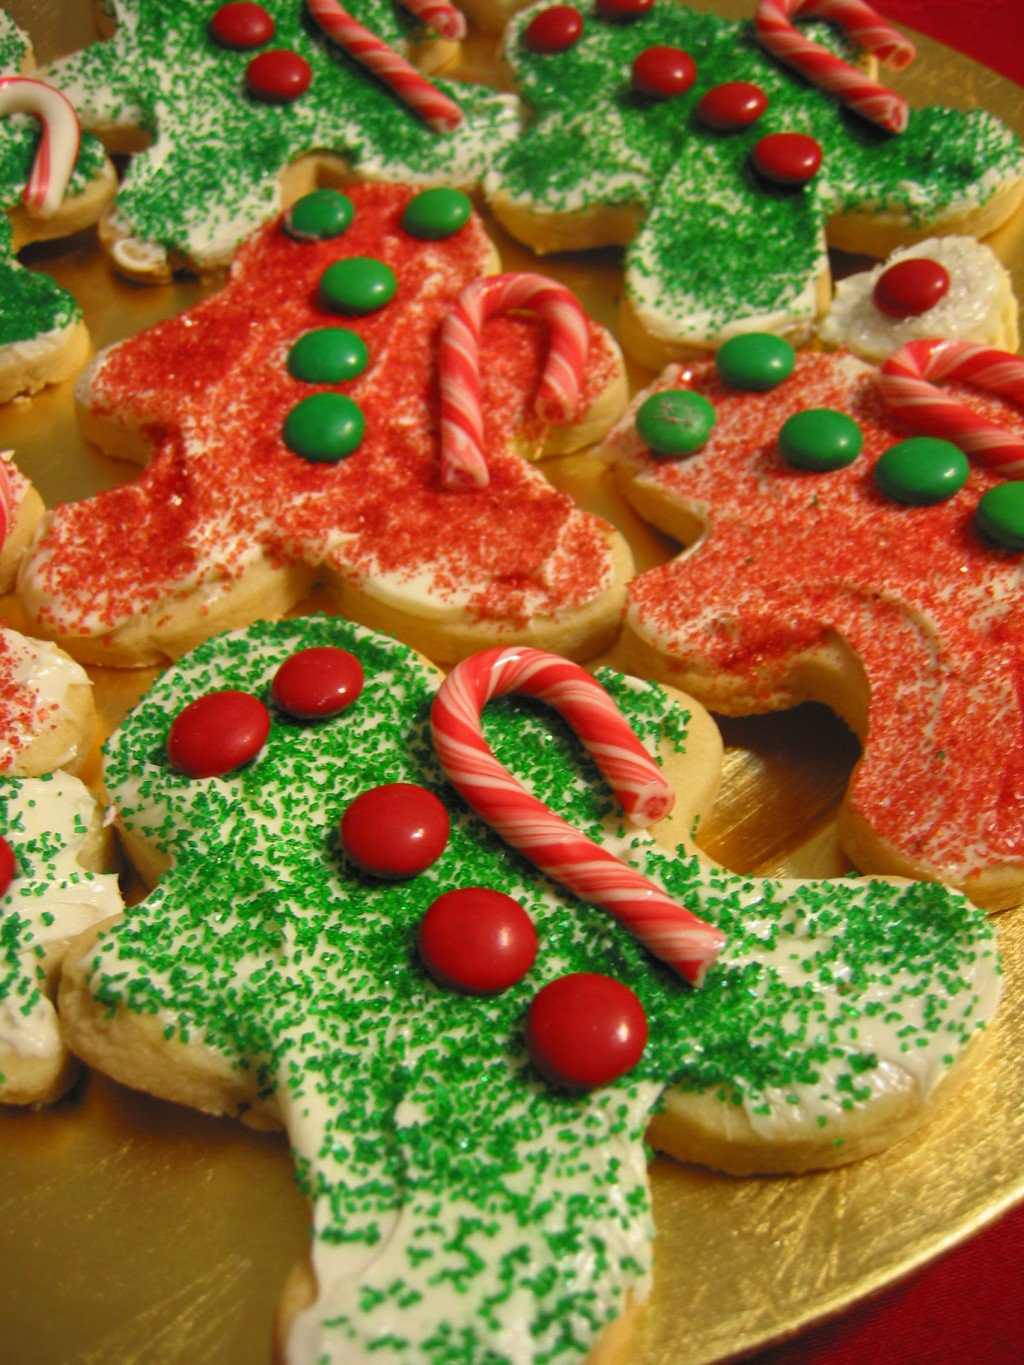 Easy Decorative Christmas Cookies
 Decorate Gingerbread Men Quick and Easy Christmas Cookies